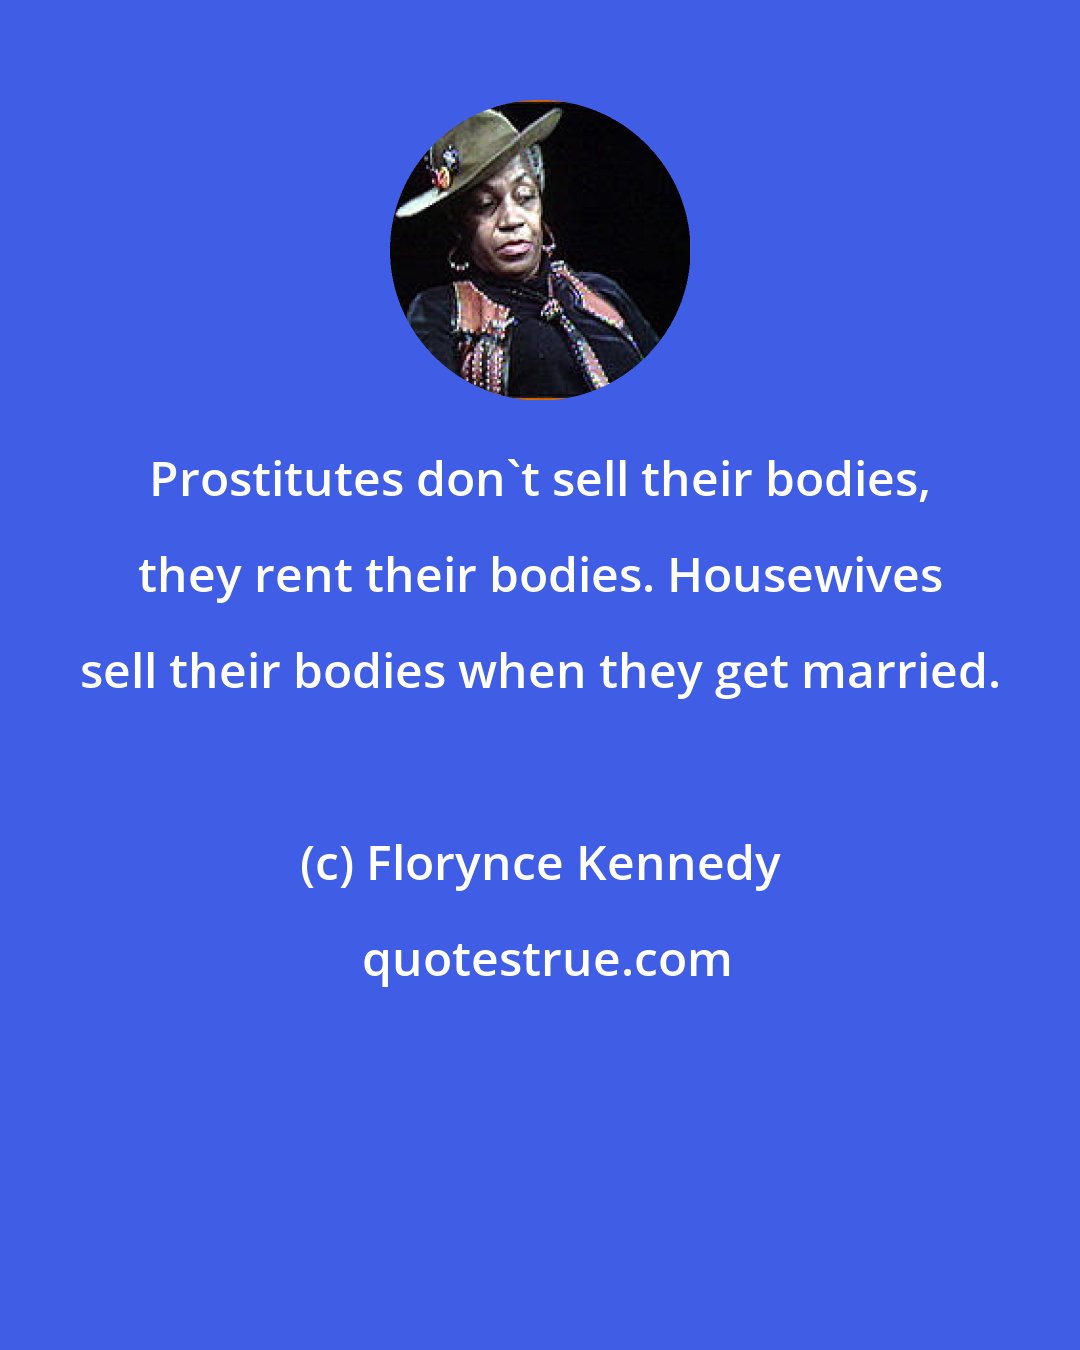 Florynce Kennedy: Prostitutes don't sell their bodies, they rent their bodies. Housewives sell their bodies when they get married.